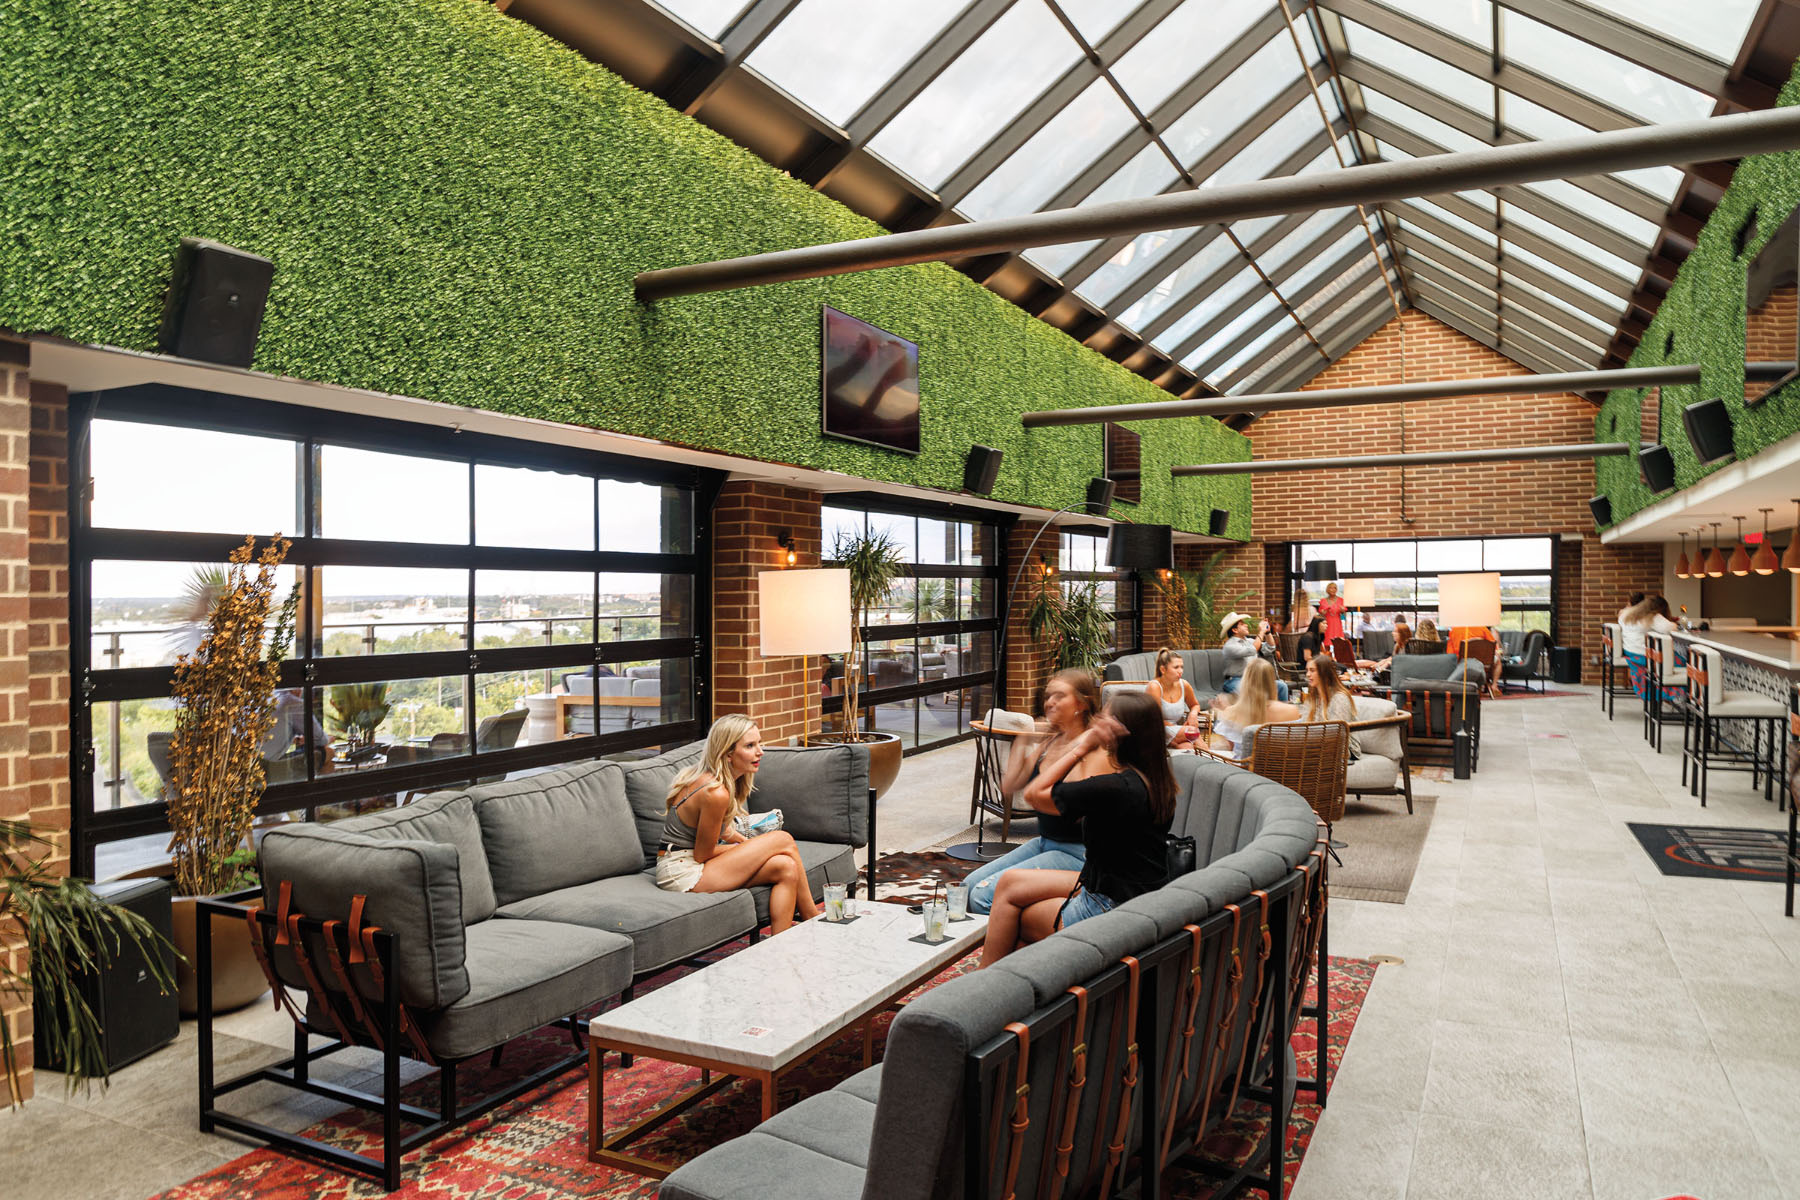 Diners sit on gray outdoor furnature under a grassy wall and bright, skylight-filled ceiling